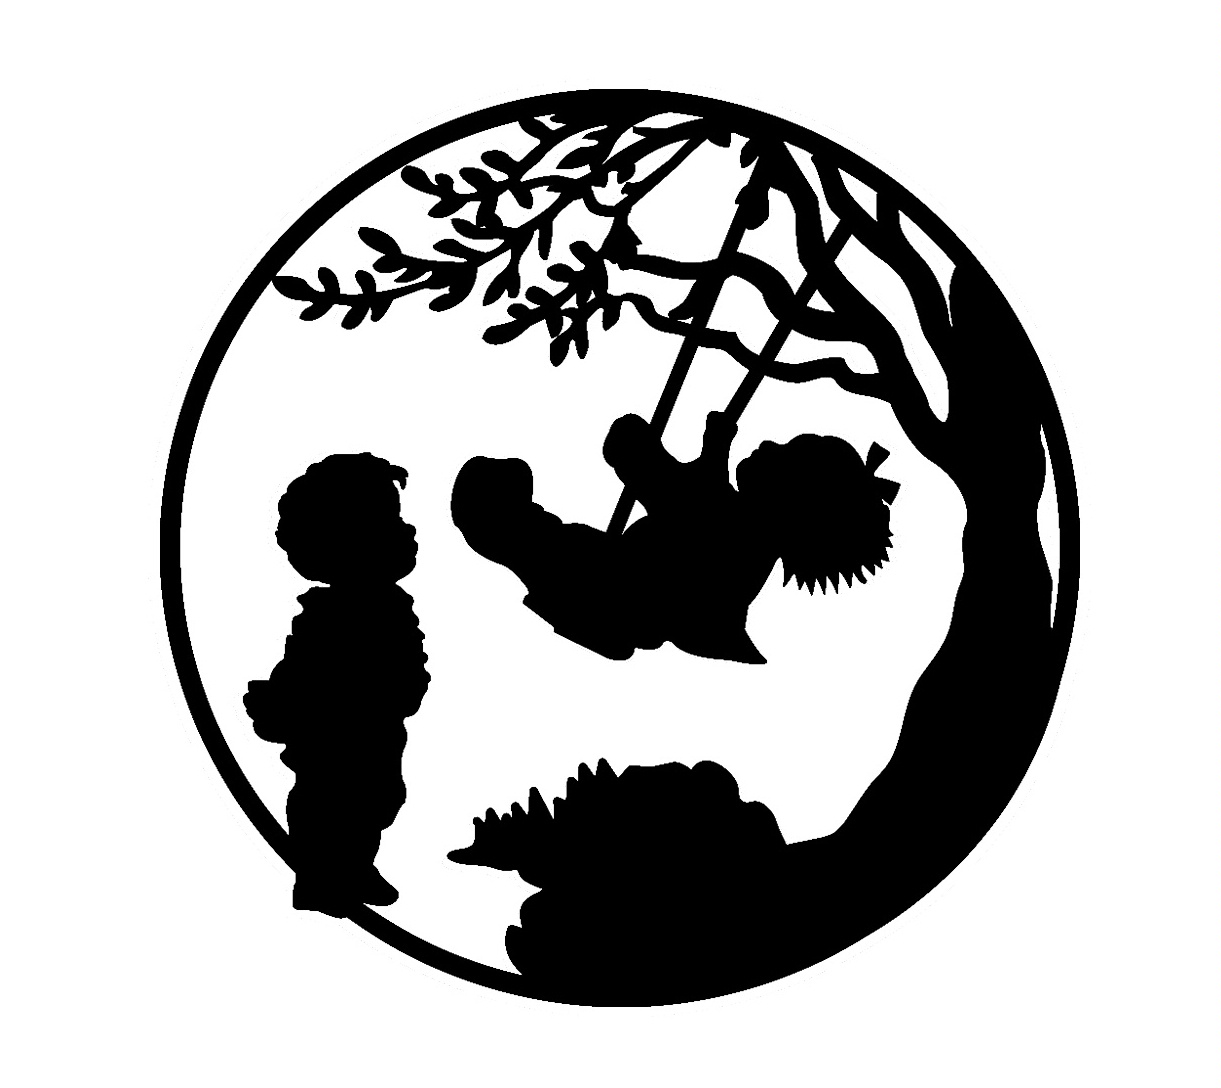 BOY BESIDE TREE WITH GIRL ON SWING, ALL SILHOUETTE by Denise Marle 